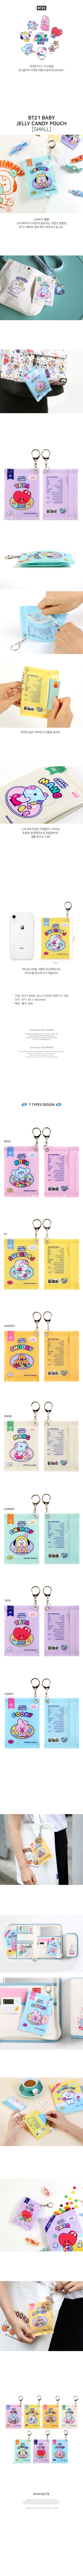 bt21_baby_jelly_candy_pouch_small_sangsae.jpg